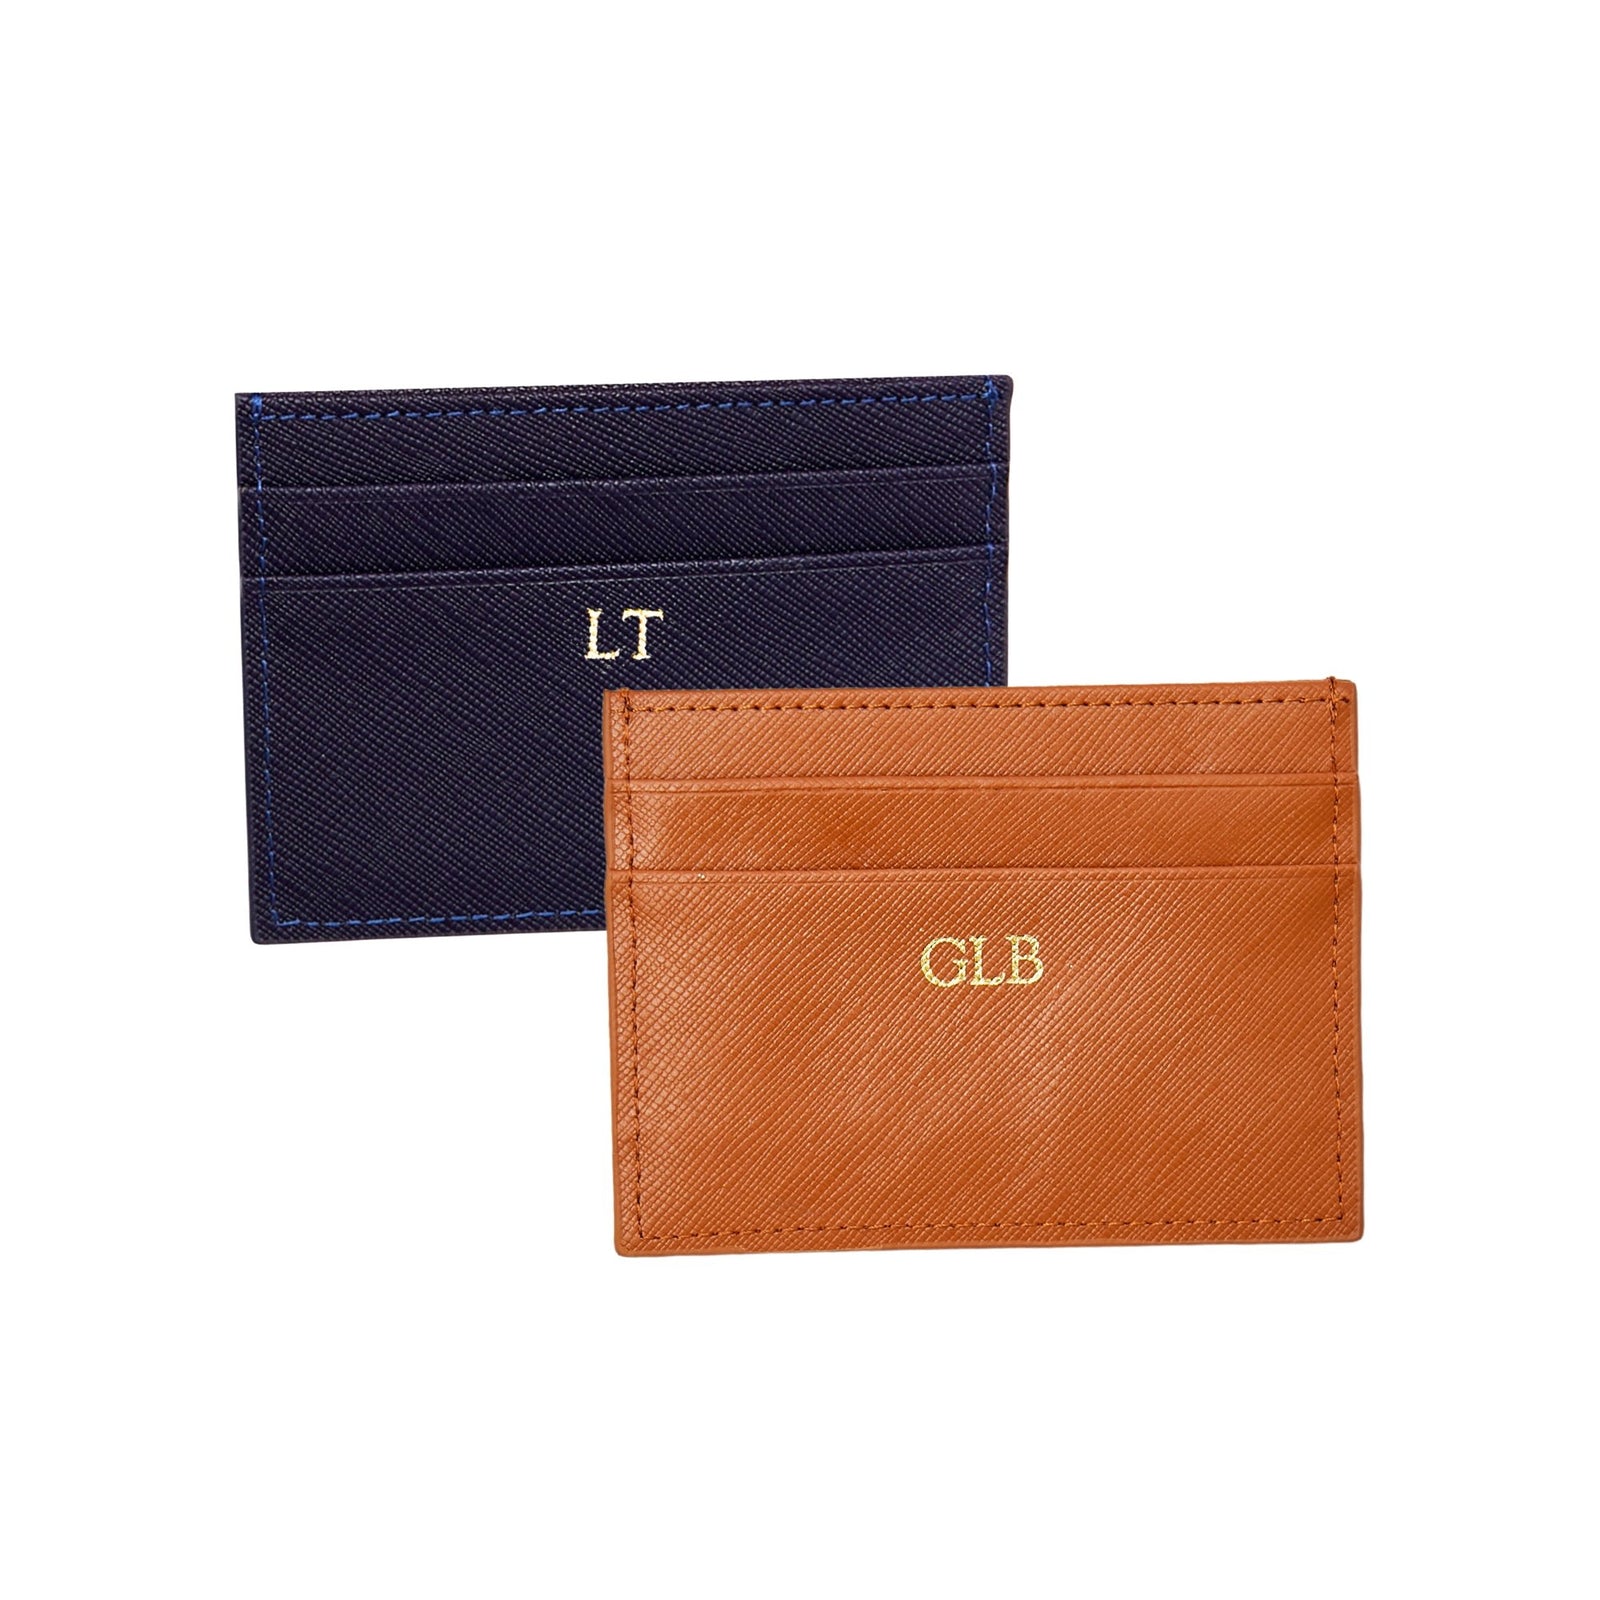 I added the Monogram Shadow Pocket Organizers! The best wallets